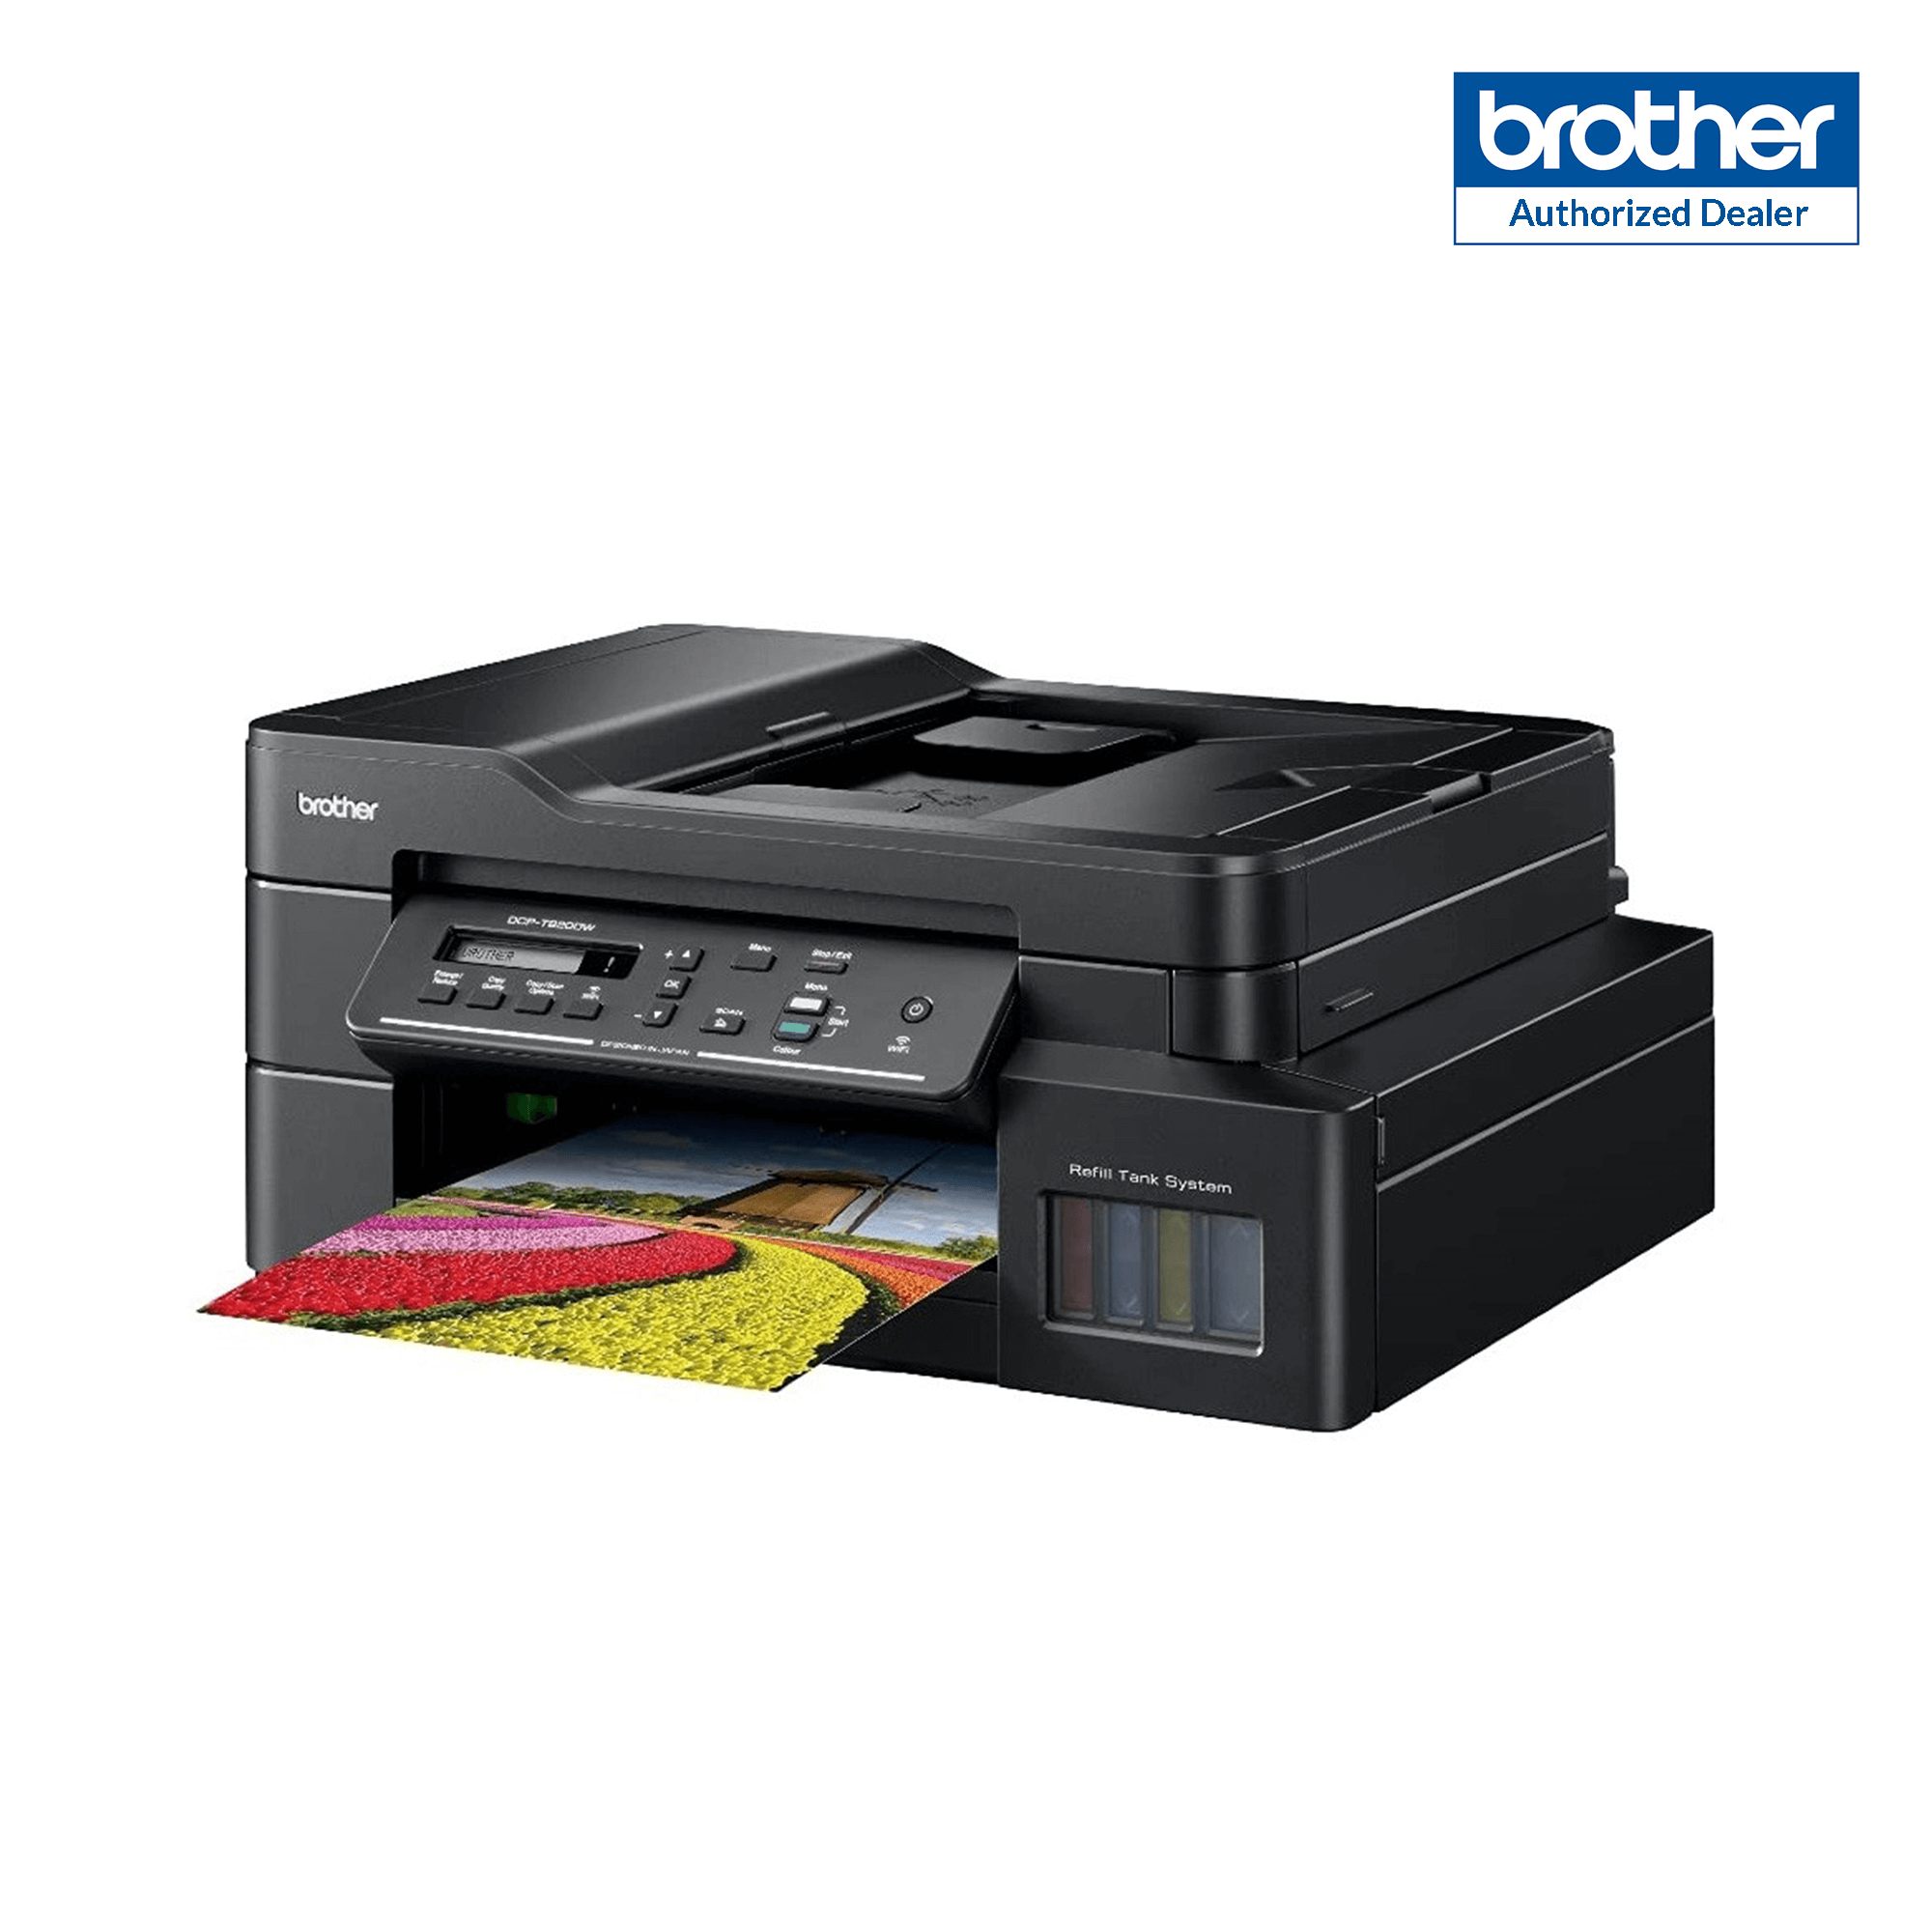 Brother DCP T720DW Ink Tank Printer